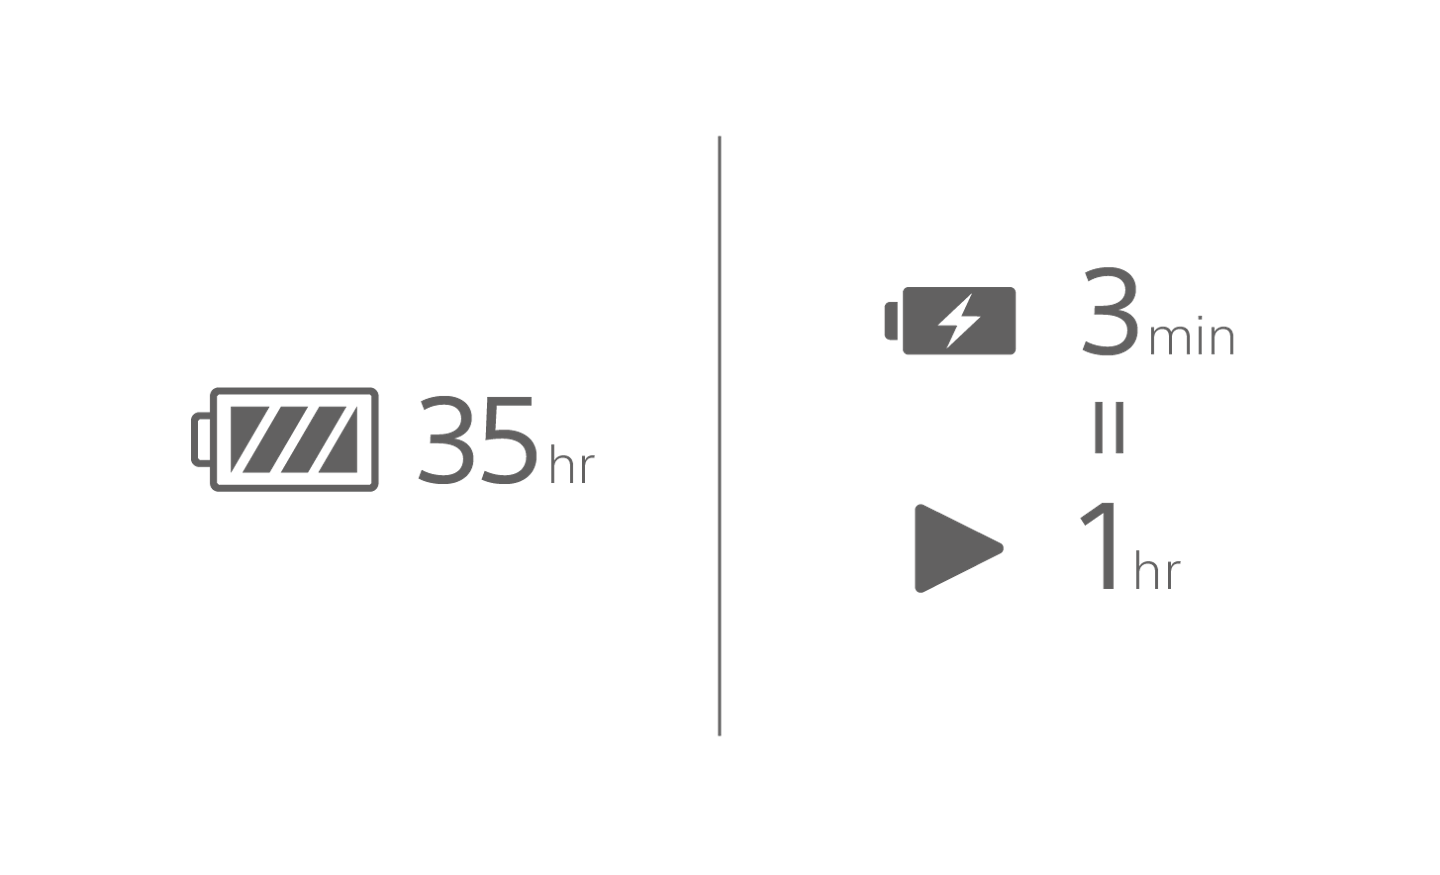 Image of a battery icon with 35 hr text, a charging battery icon with 3 min text above a play icon with 1hr text